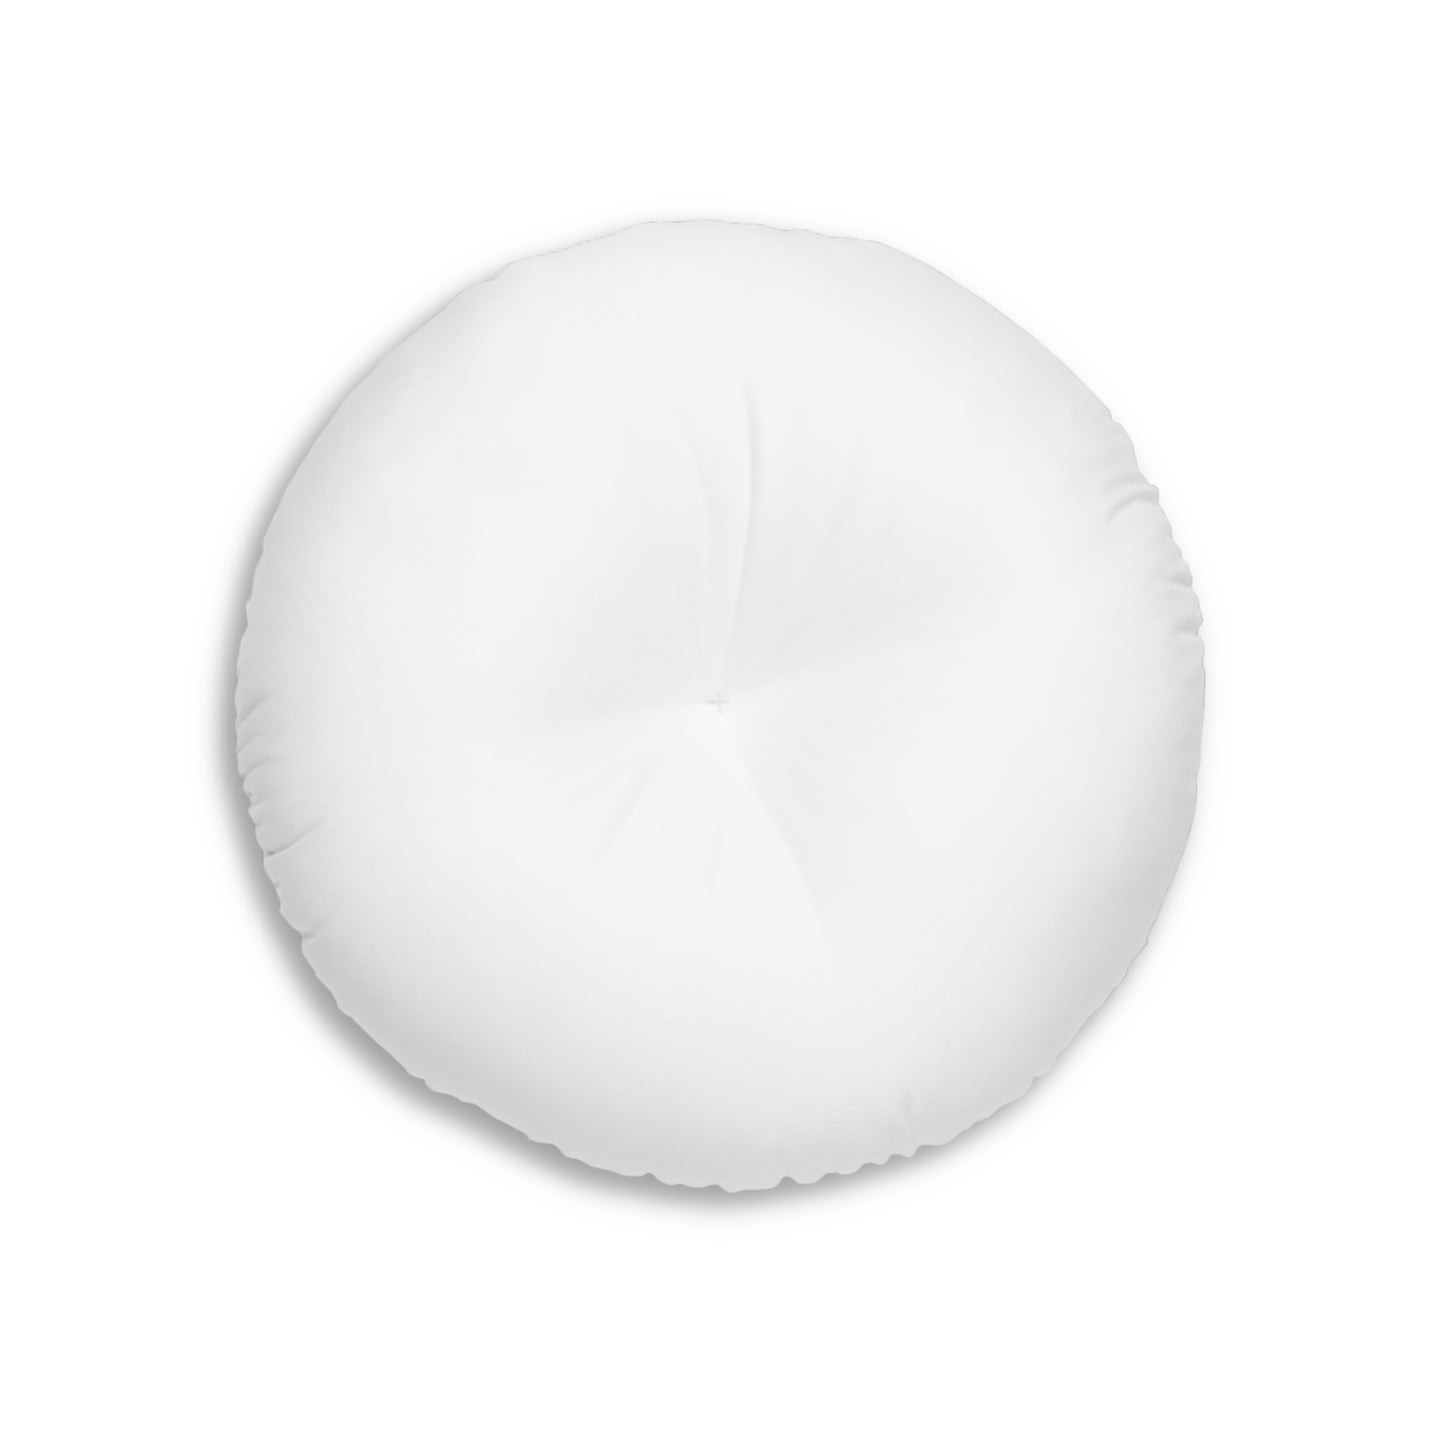 Round Tufted Floor Pillow - Pure White